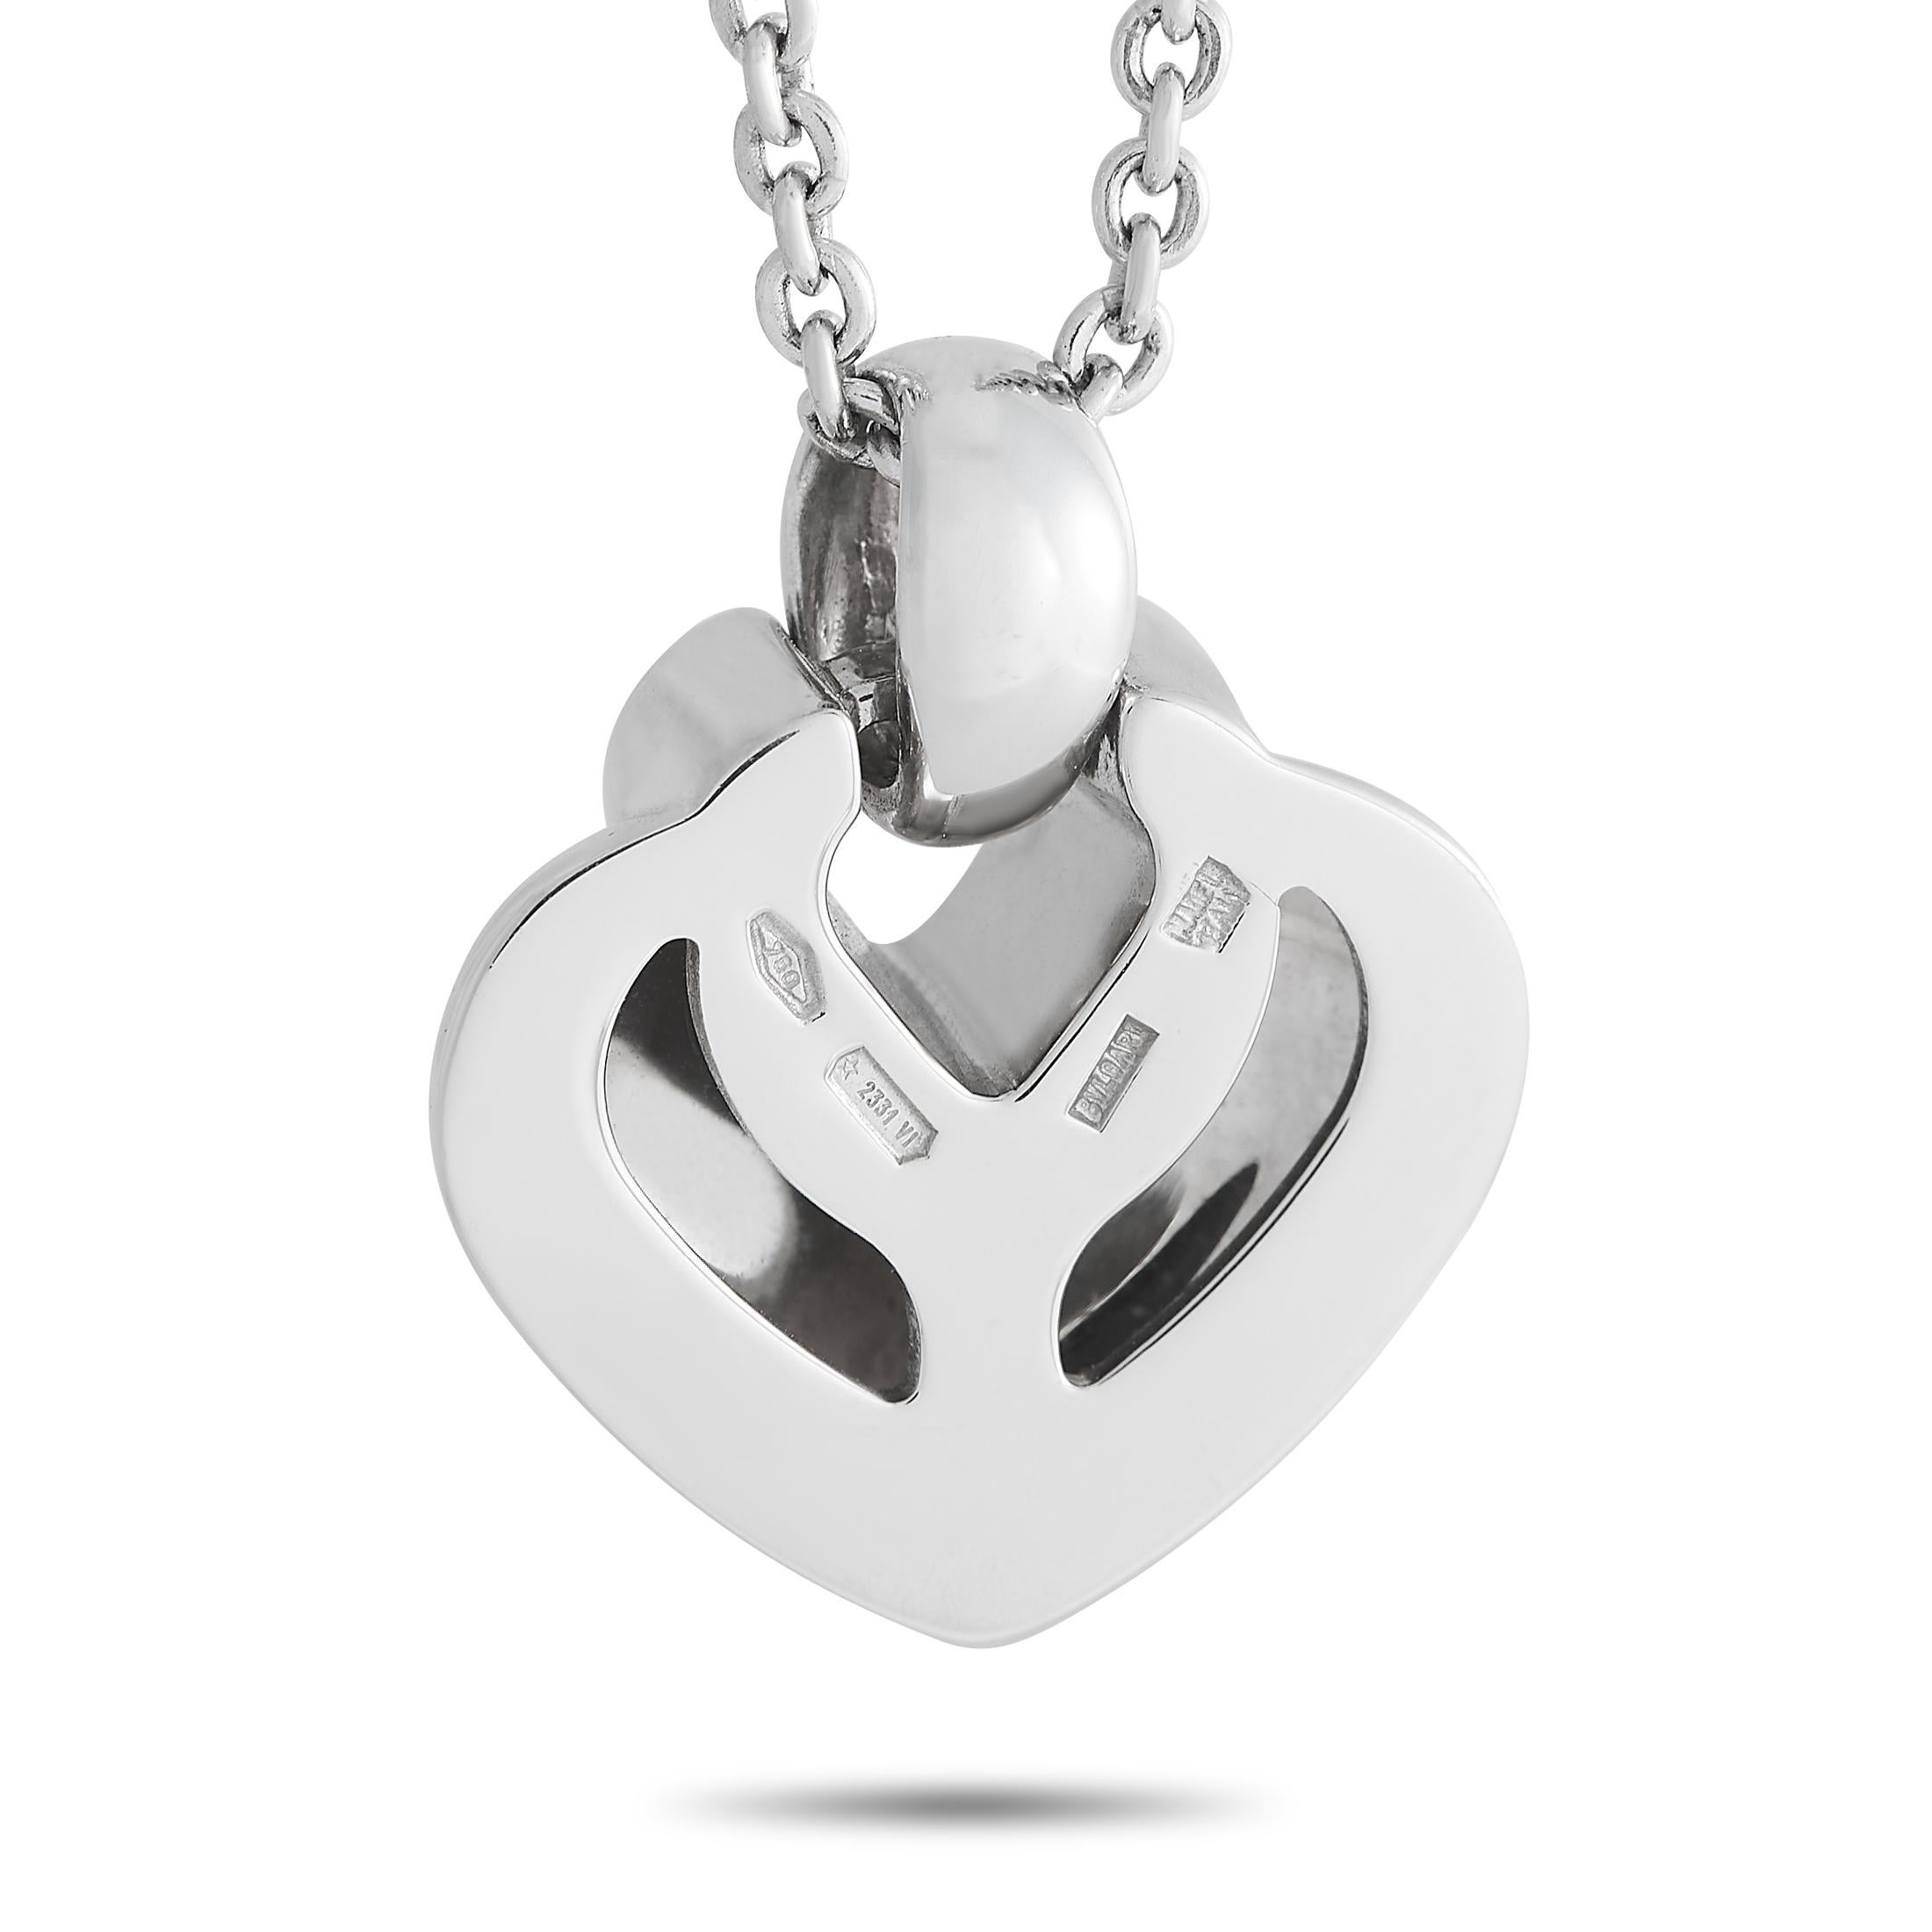 This charming diamond heart necklace from the Doppio Cuore collection of Bvlgari is unexpectedly flattering. It features a polished white gold pendant measuring approximately 0.65 in diameter. Round diamonds trace the inner heart outline near the